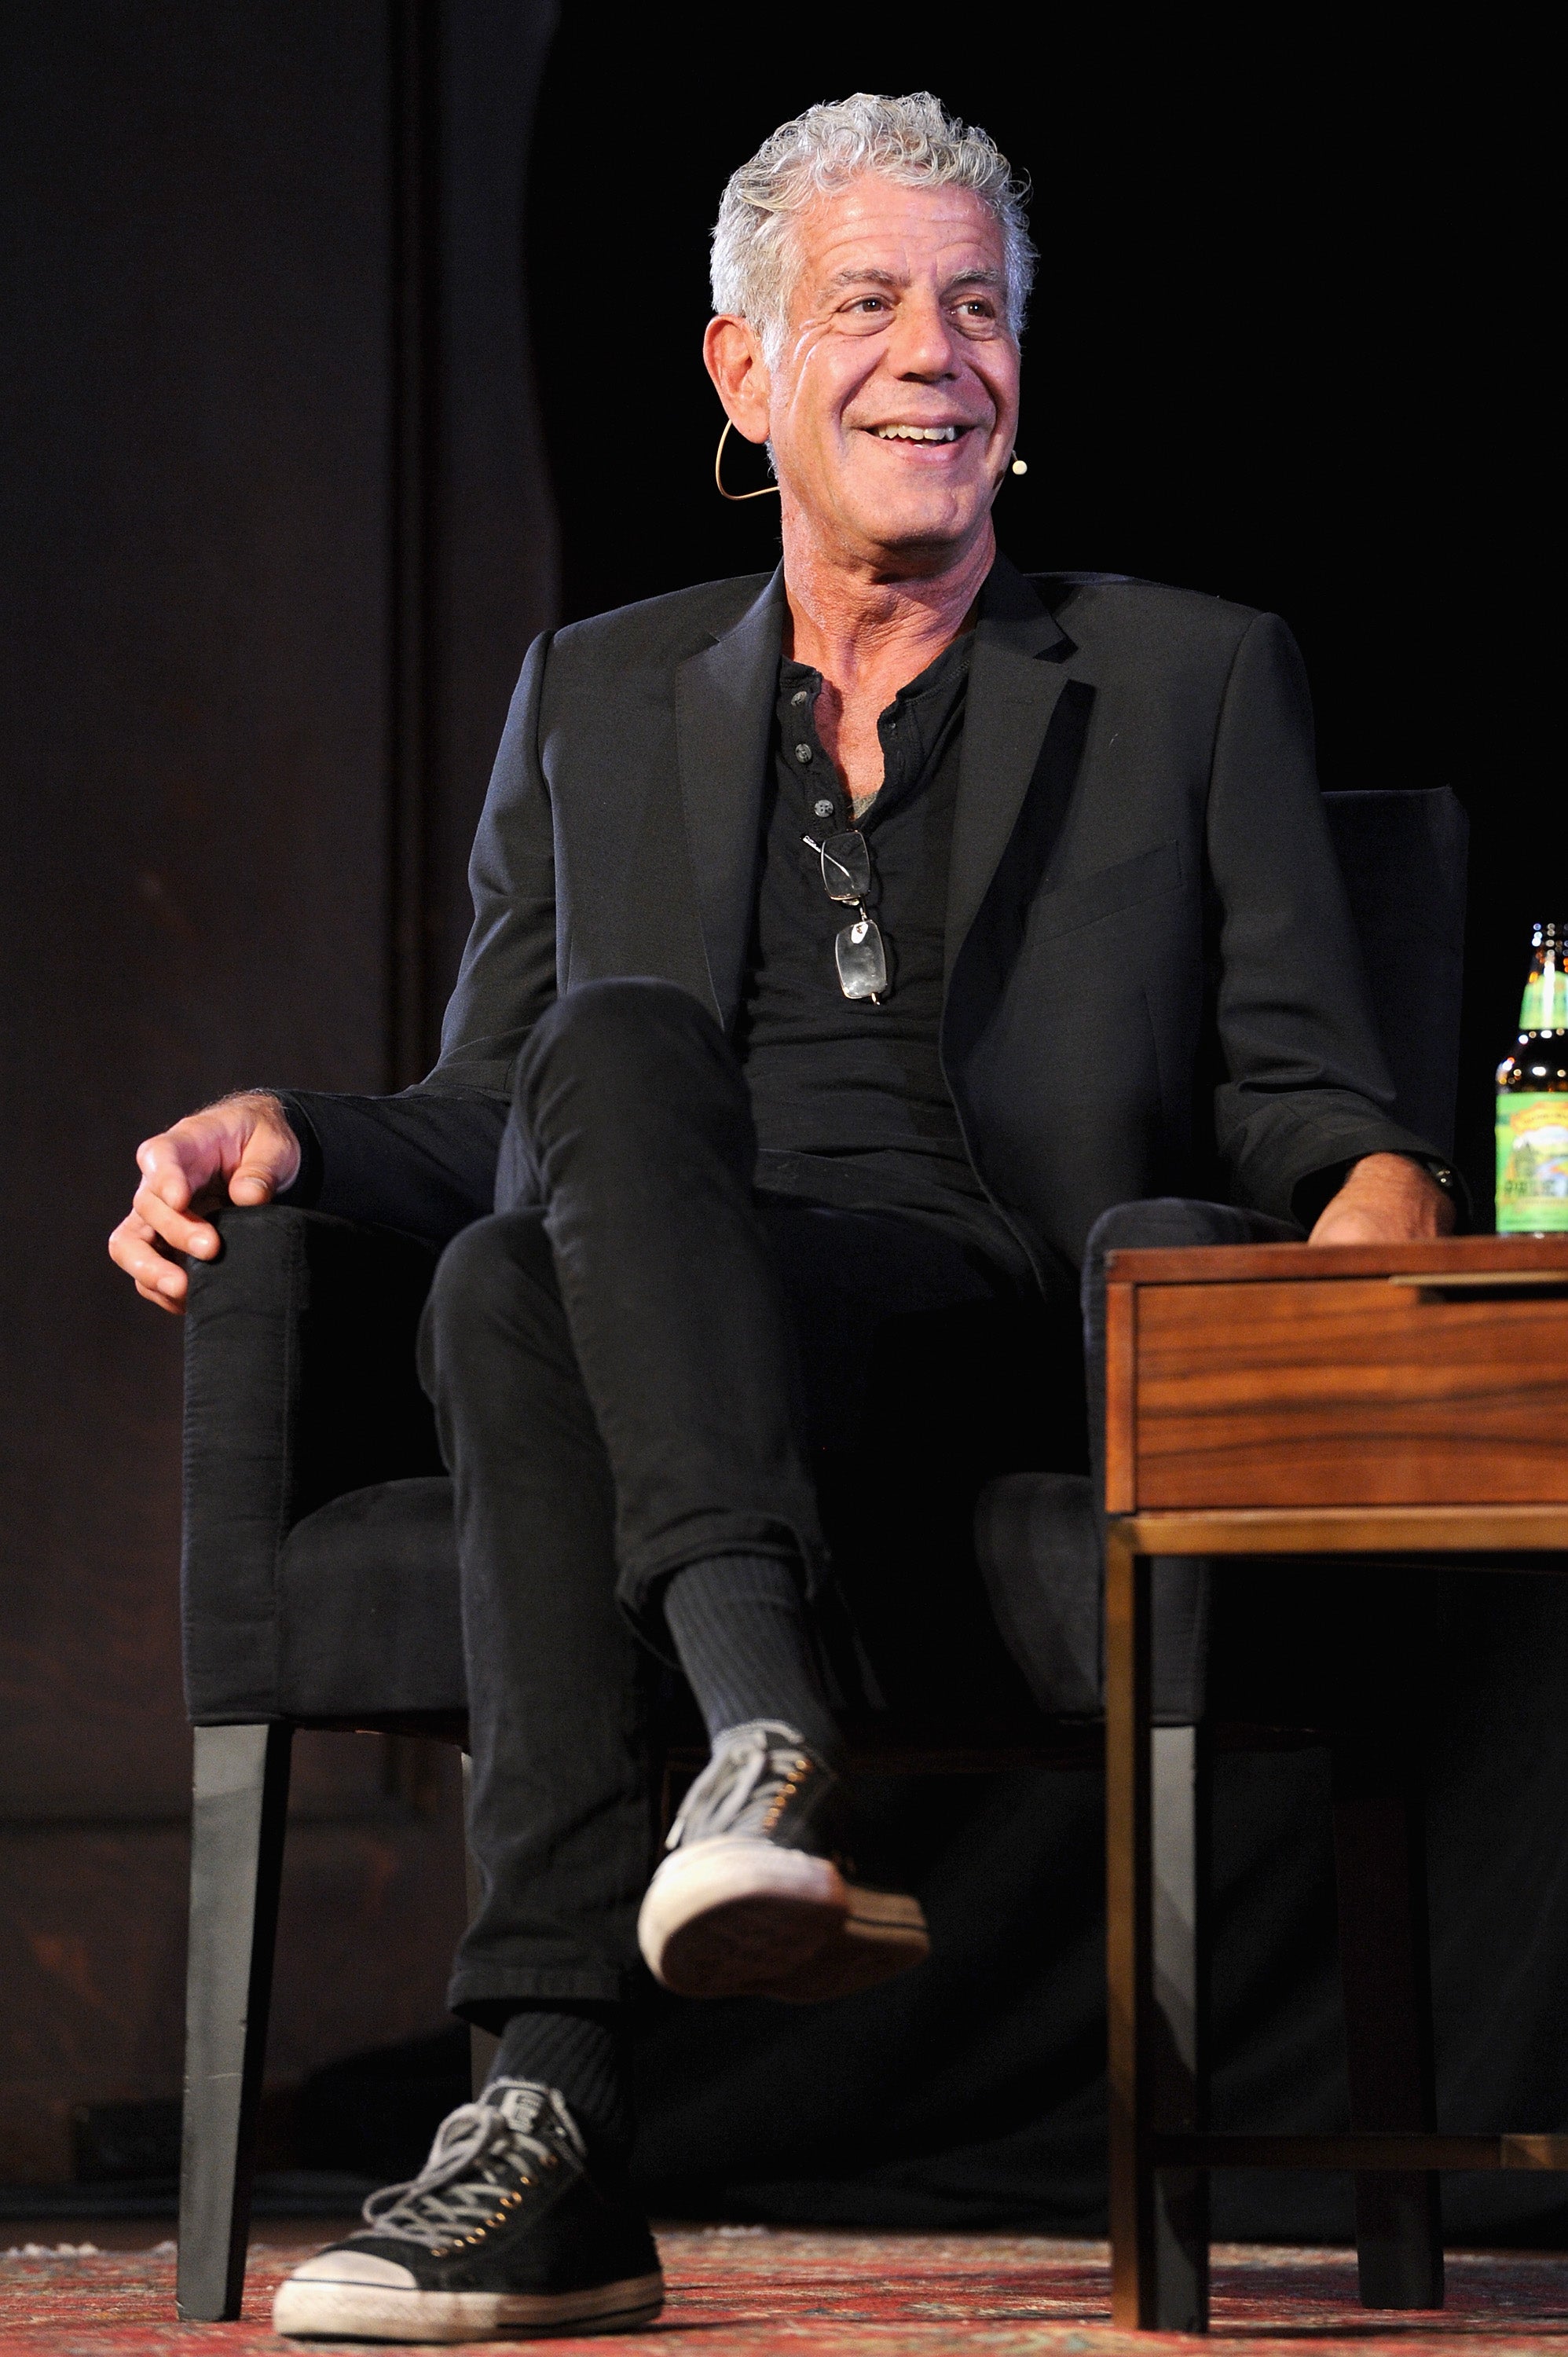 Chef Anthony Bourdain speaks onstage during a panel with Patrick Radden Keefe at the New York Society for Ethical Culture on 7 October 2017 in New York City